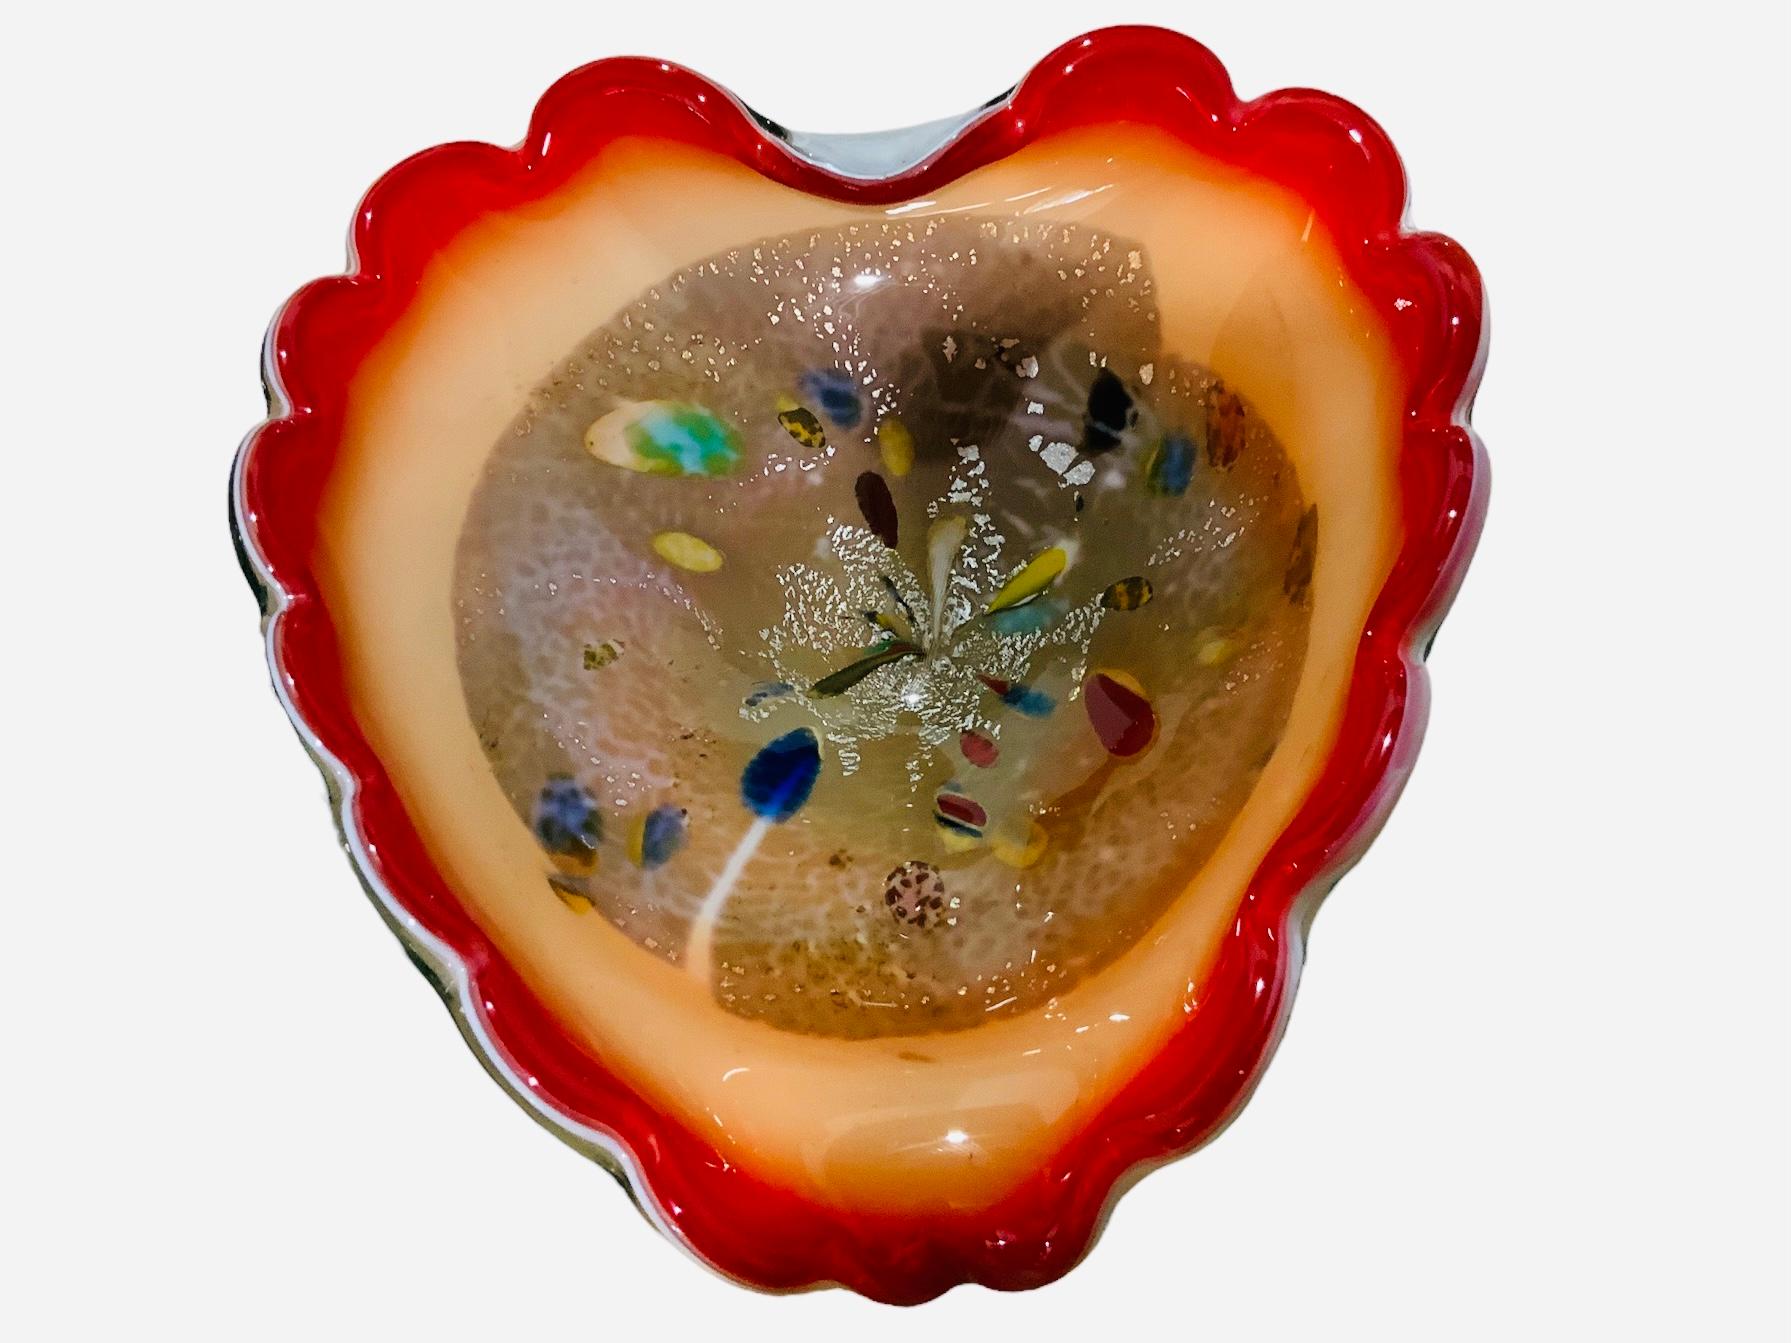 This is a Murano Art Biomorphic Glass Bowl. It depicts a heart shaped glass. It is white color in the back and in the front, its upper side is red, the middle one is light orange color and the center is clear glass enhanced with very colorful small